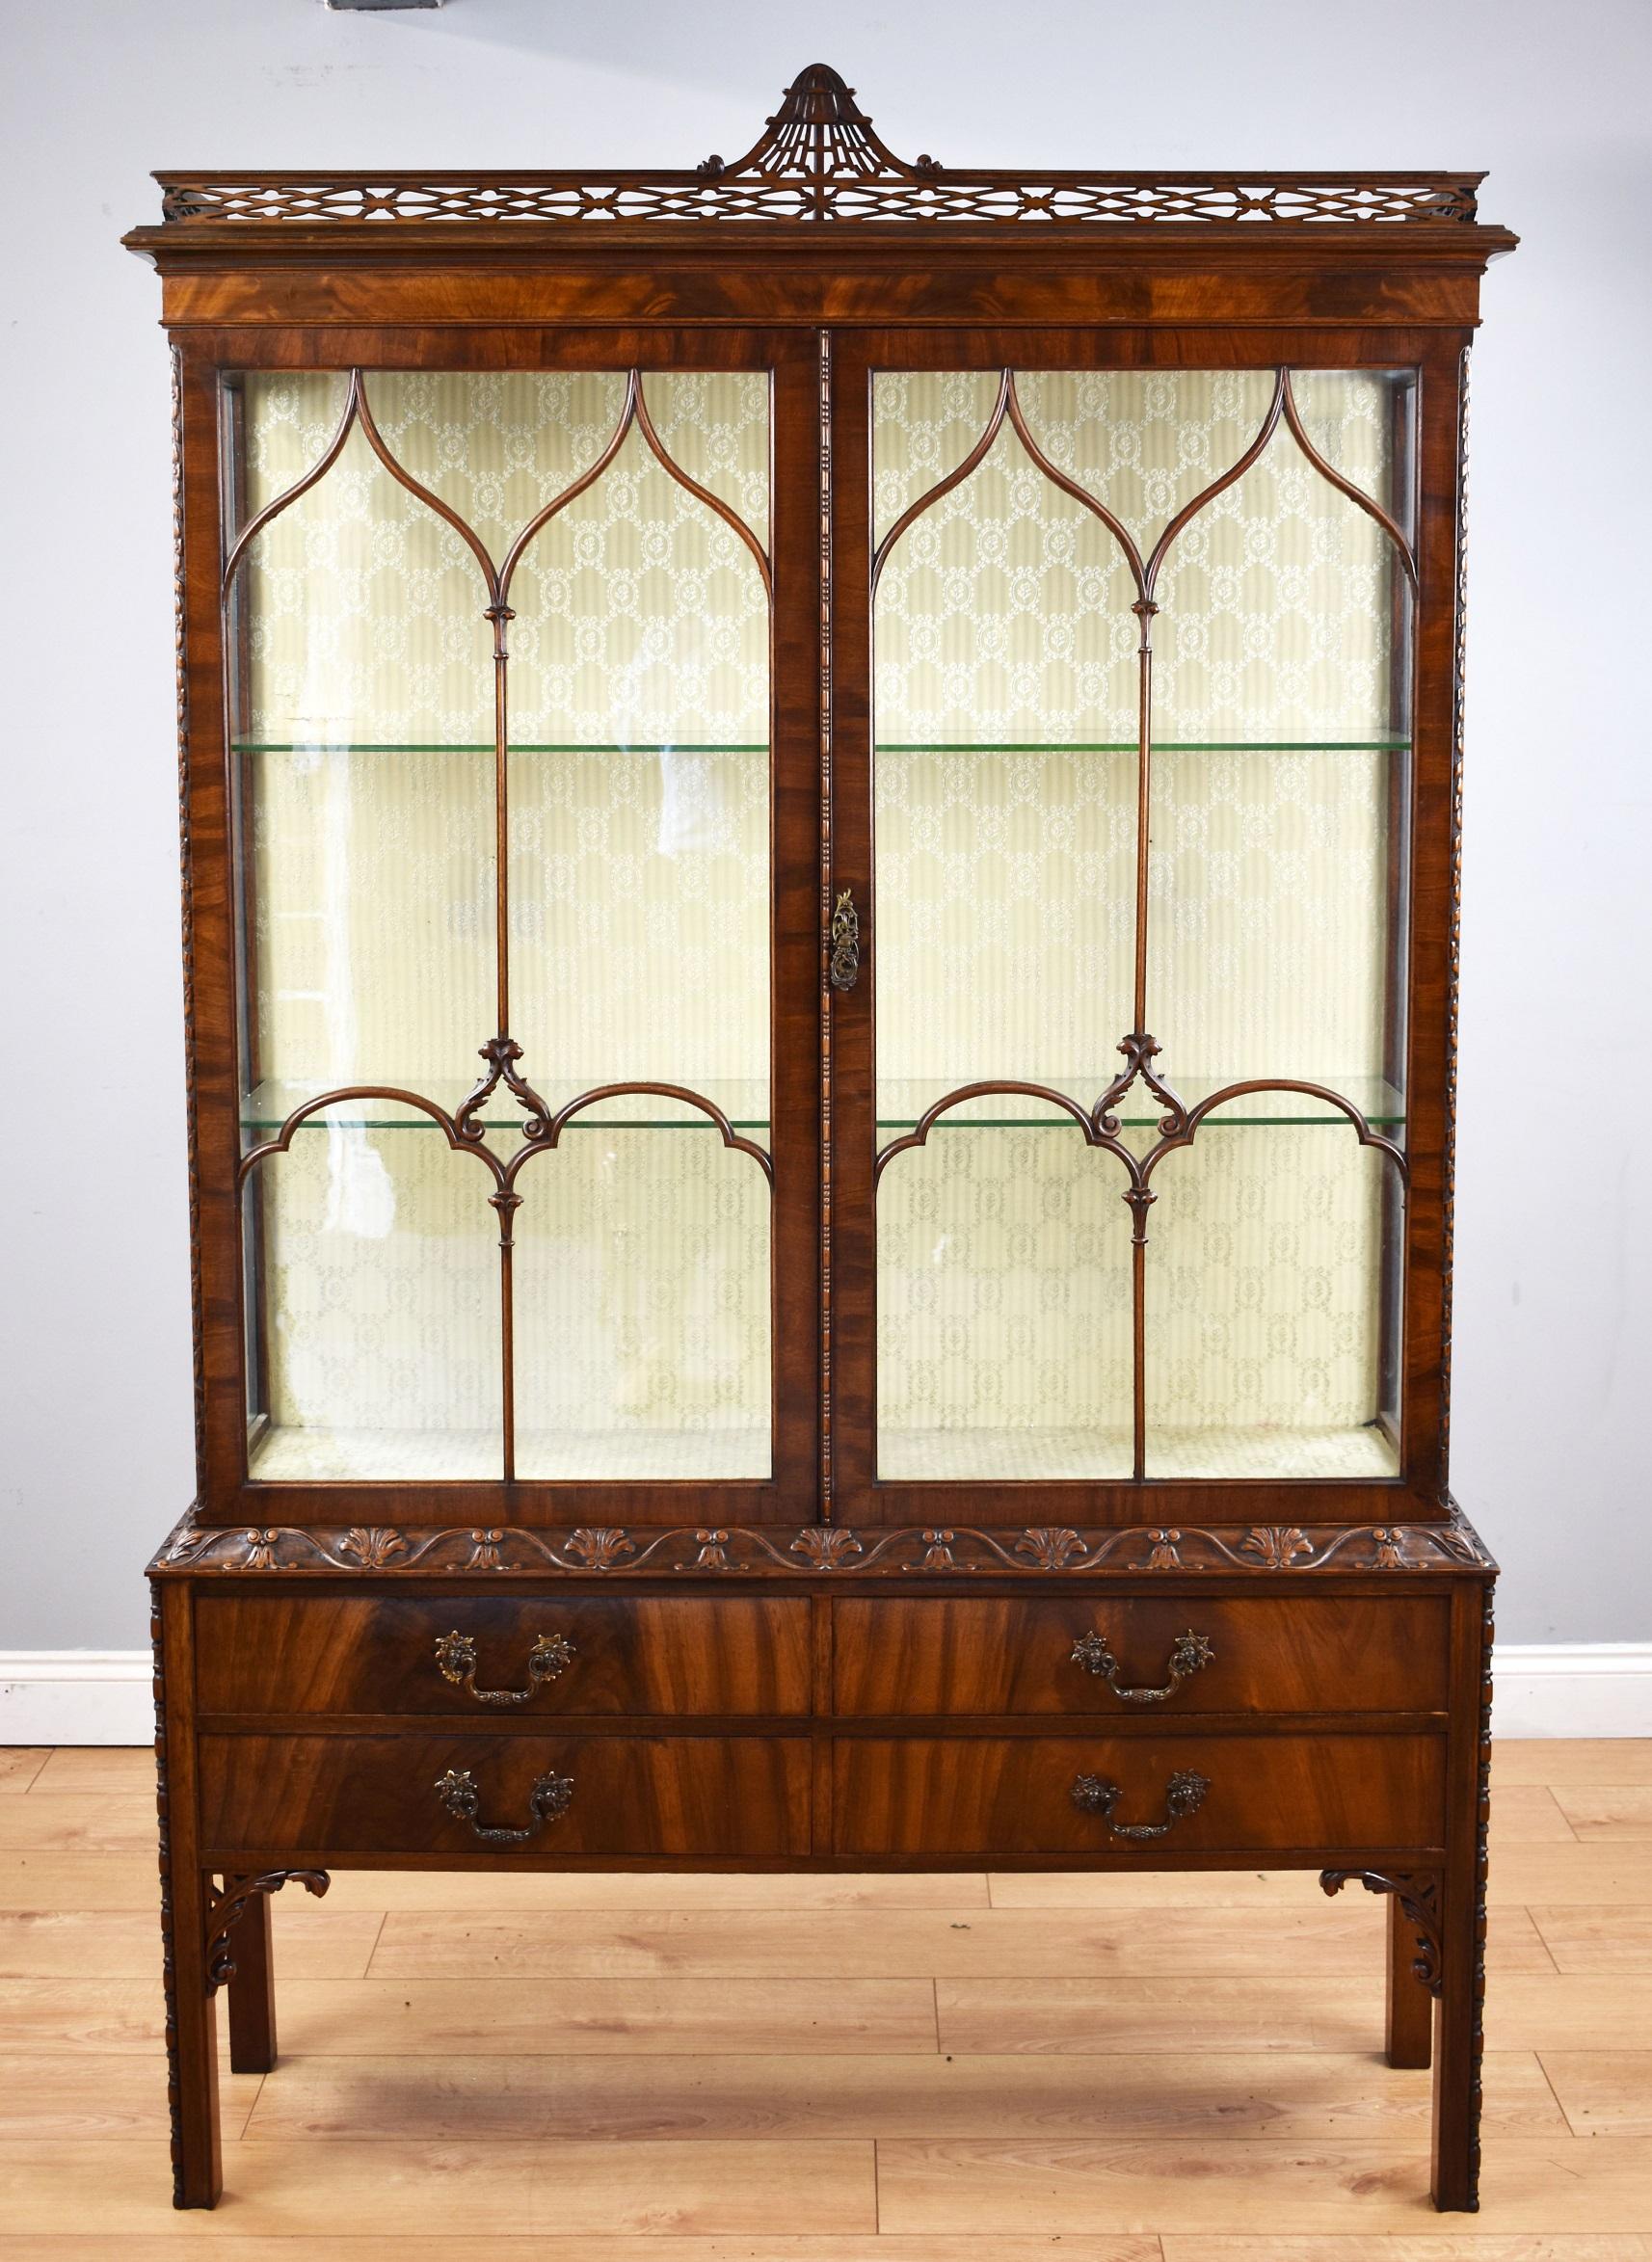 Fine quality flamed mahogany Chinese Chippendale style display cabinet in good condition, the top has decorative open fret work with two astragal glazed doors enclosing two glass shelves. The base has decorative edges with four drawers and stands on